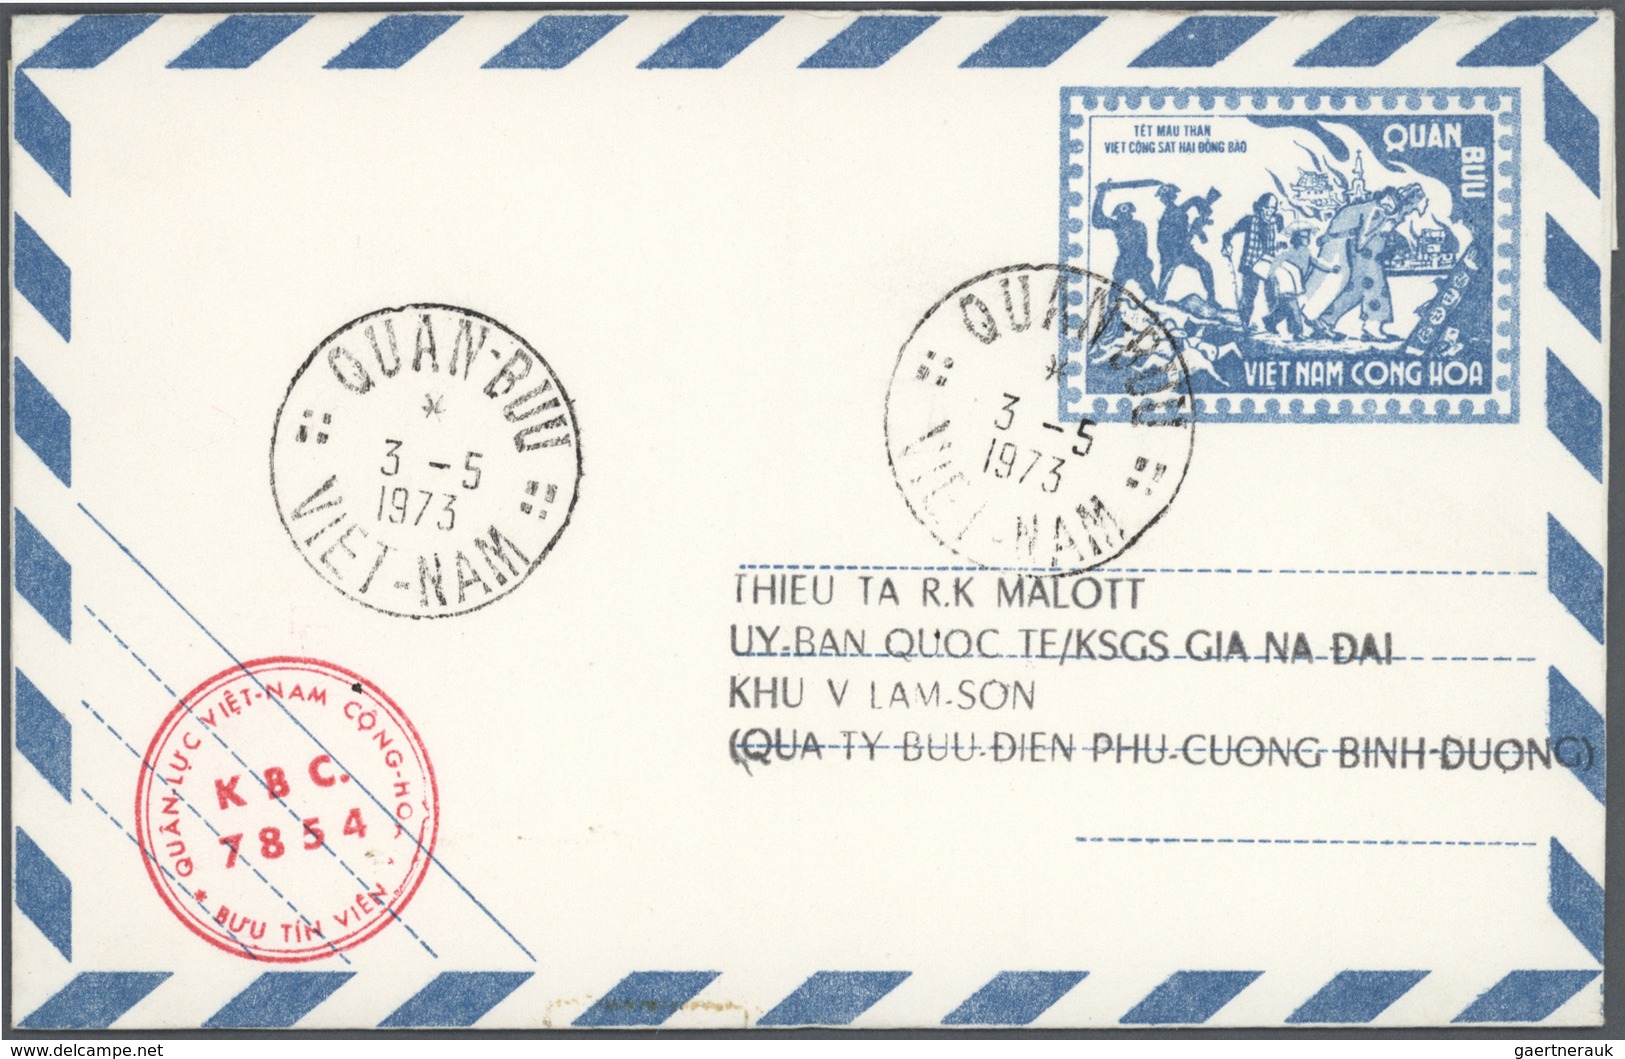 Vietnam-Süd (1951-1975): 1955/1973, ex-1 all military airletters (Quan Buu) in blue mint (15) or use